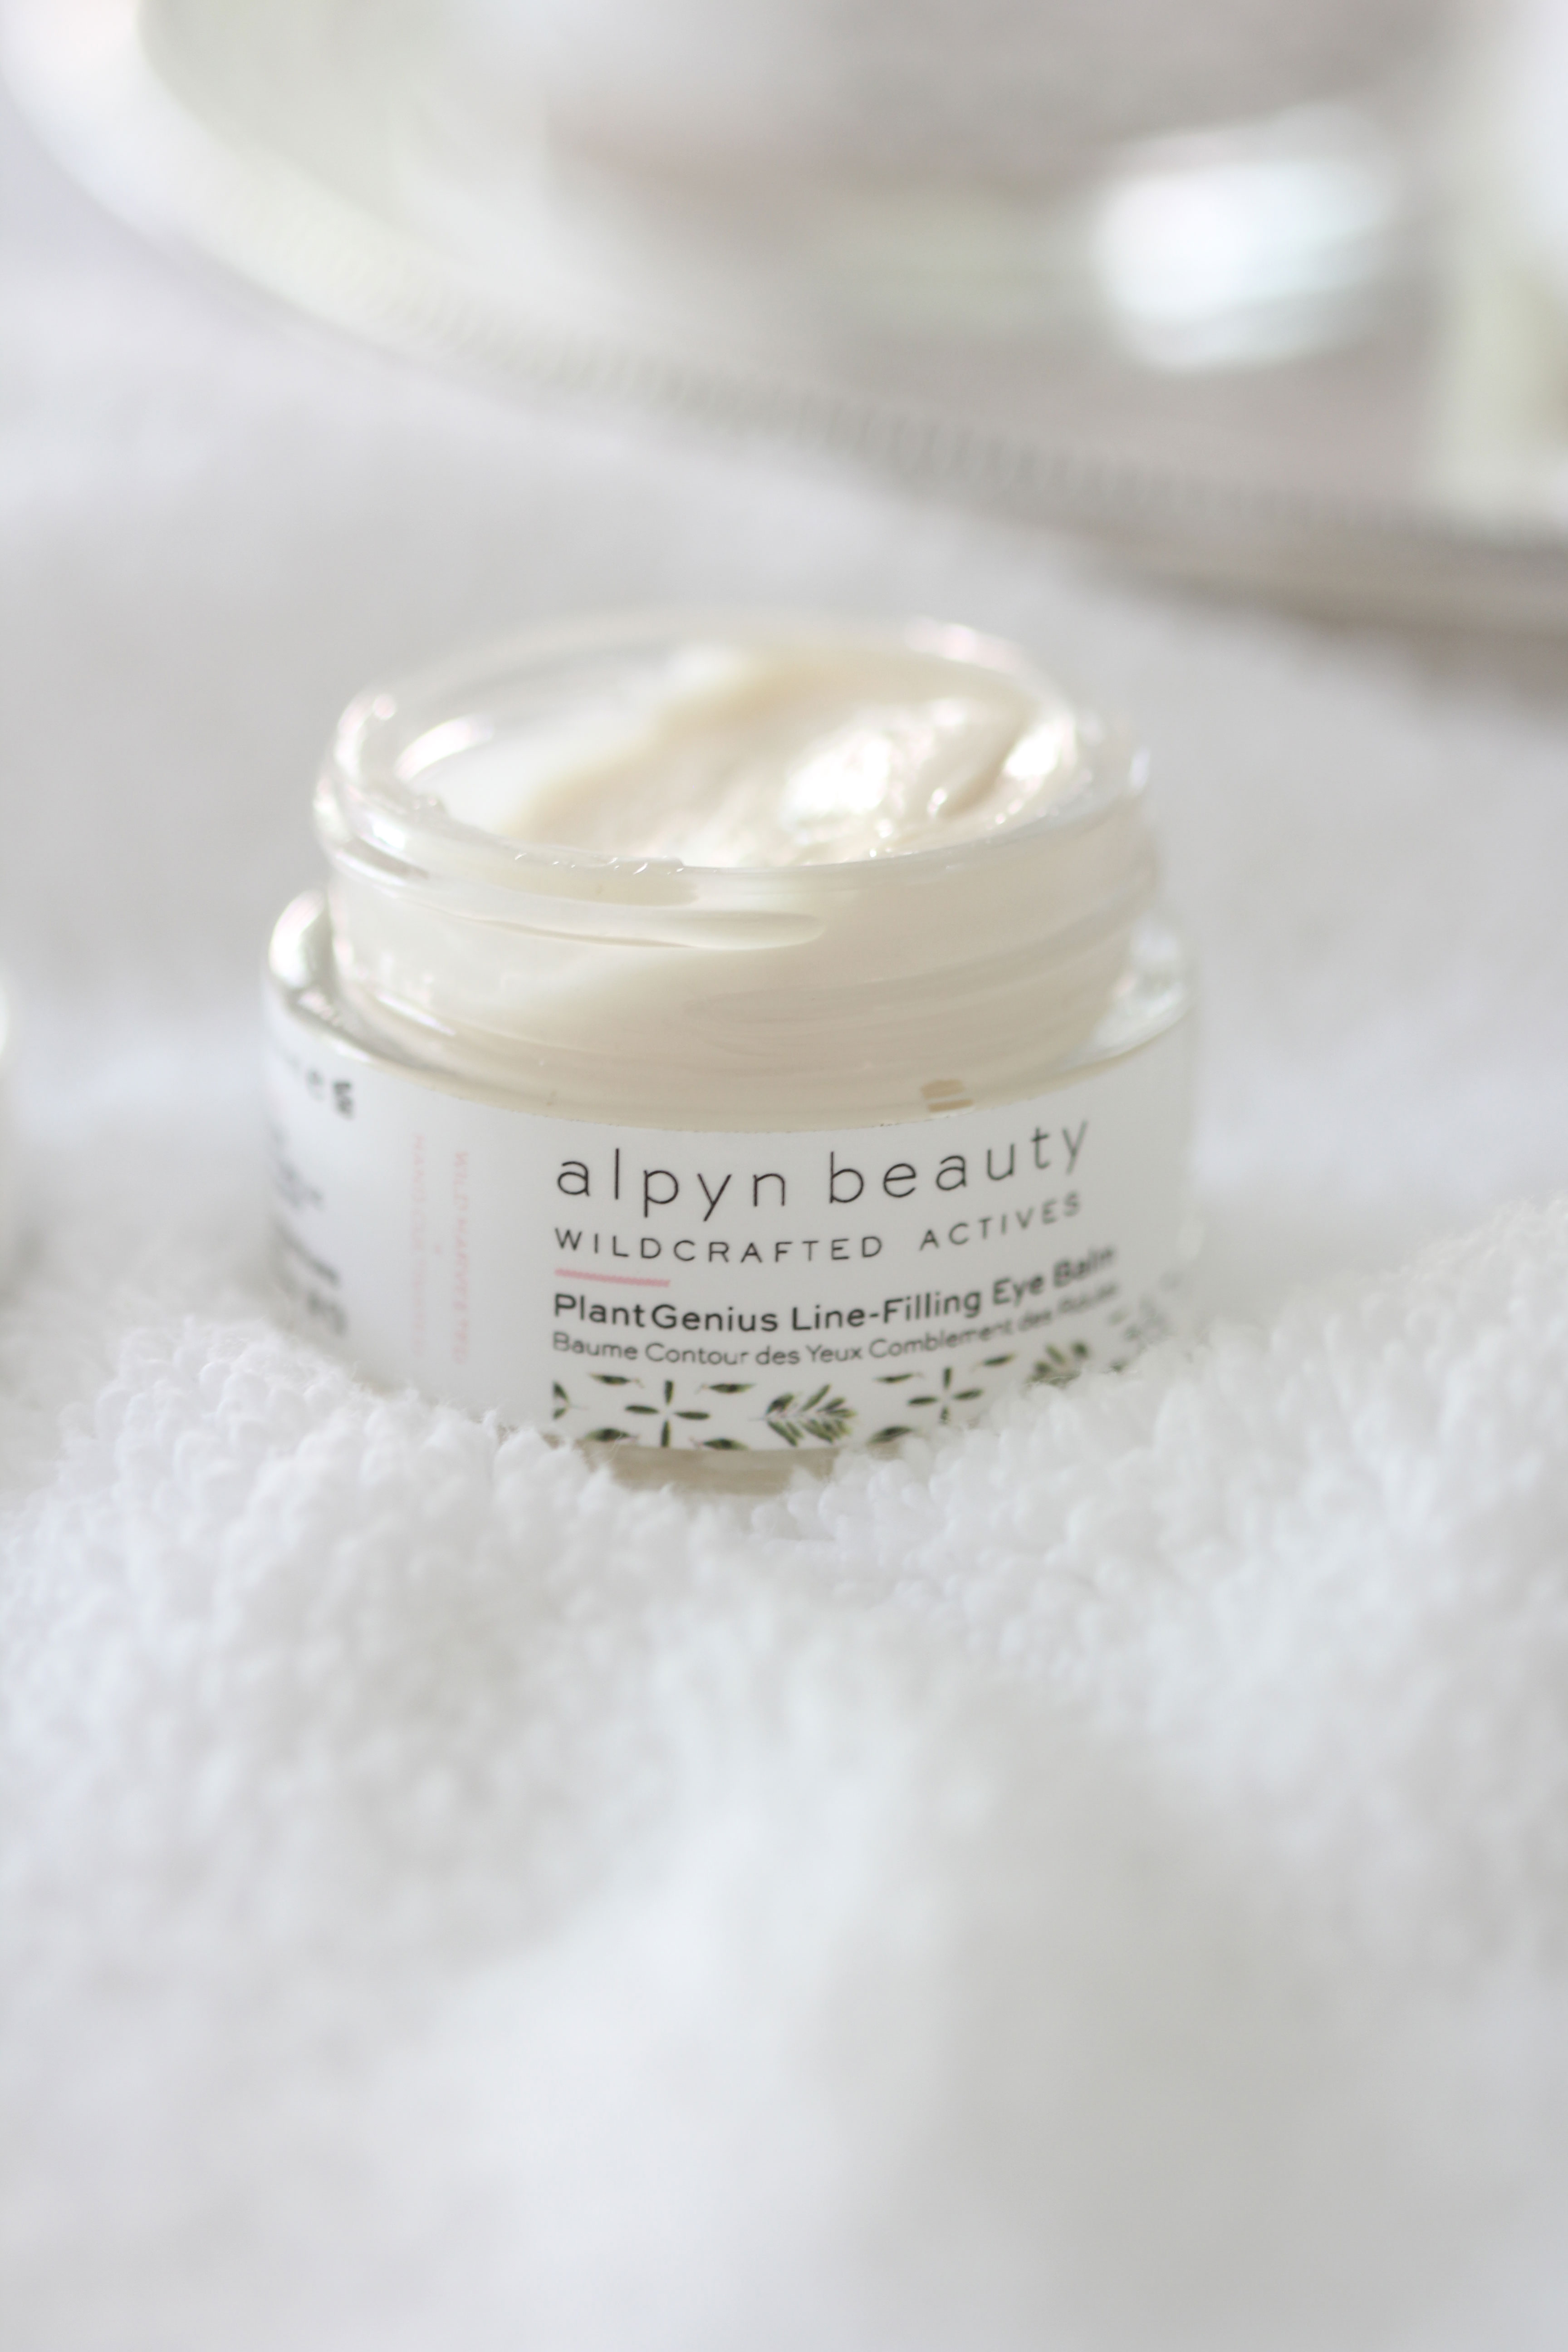 Treat your skin to them best clean beauty products from Alpyn Beauty! Includes an eye-balm that will brighten and tighten the delicate eye area.